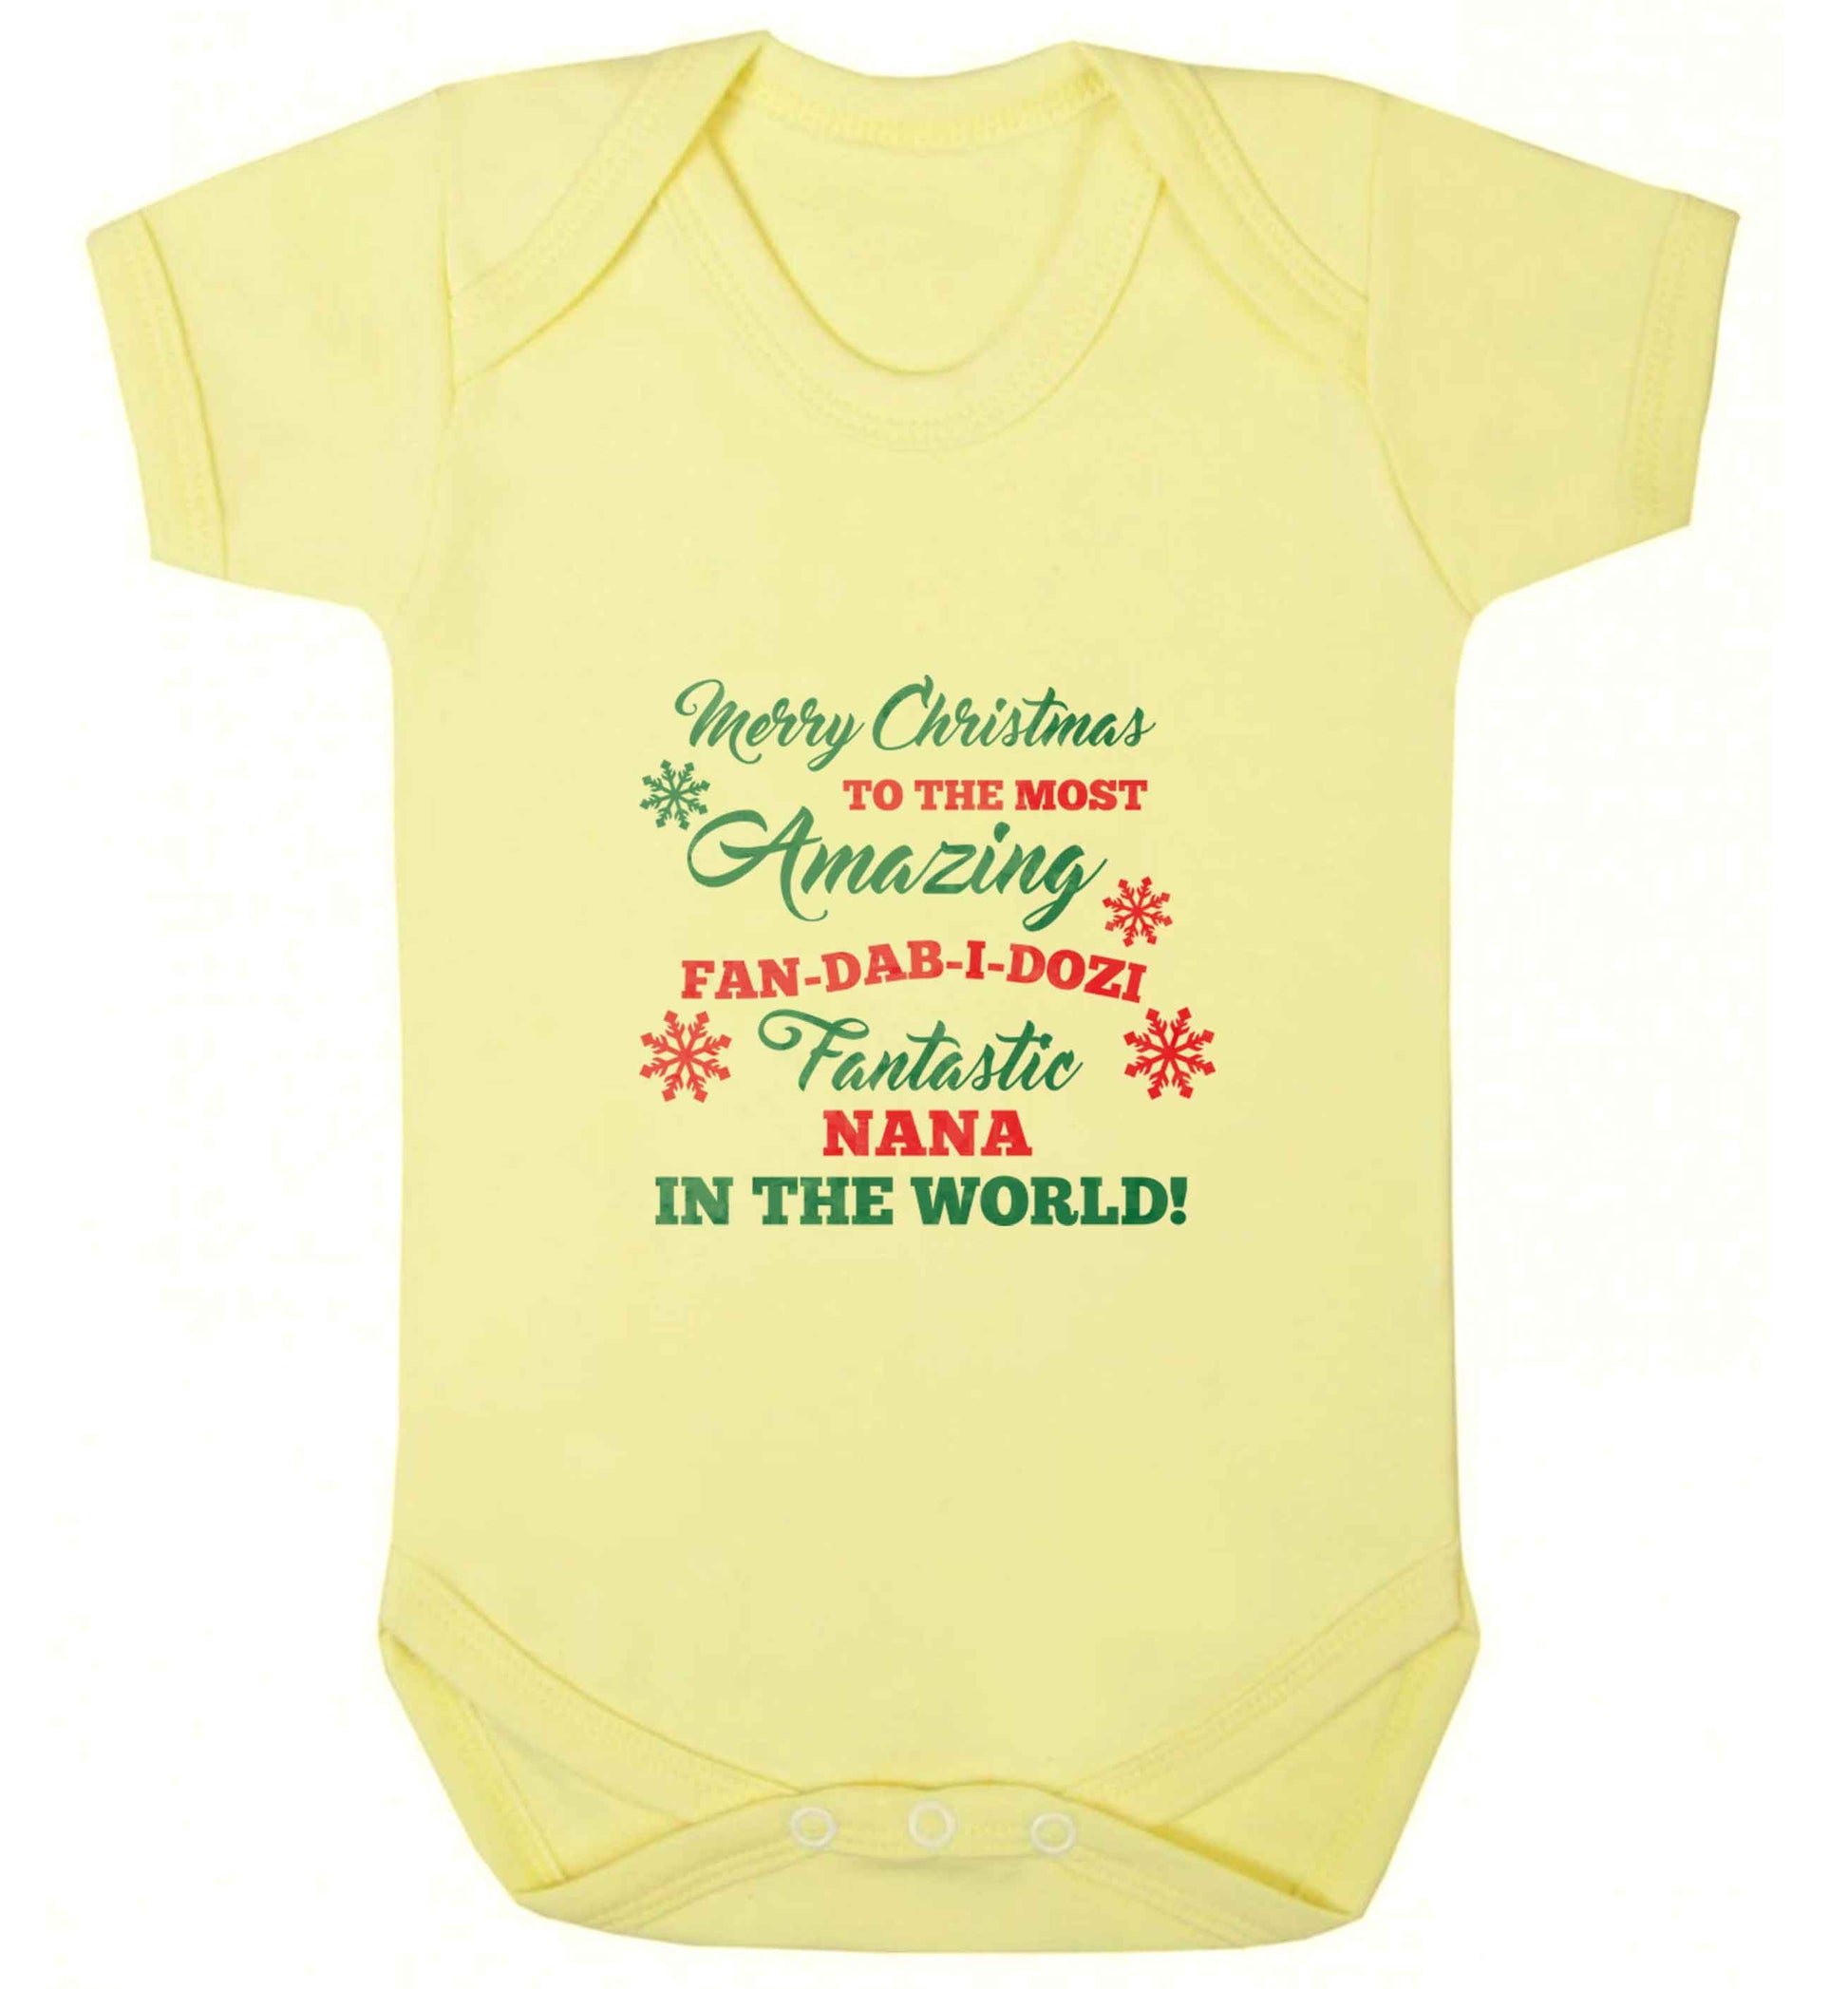 Merry Christmas to the most amazing fan-dab-i-dozi fantasic Nana in the world baby vest pale yellow 18-24 months